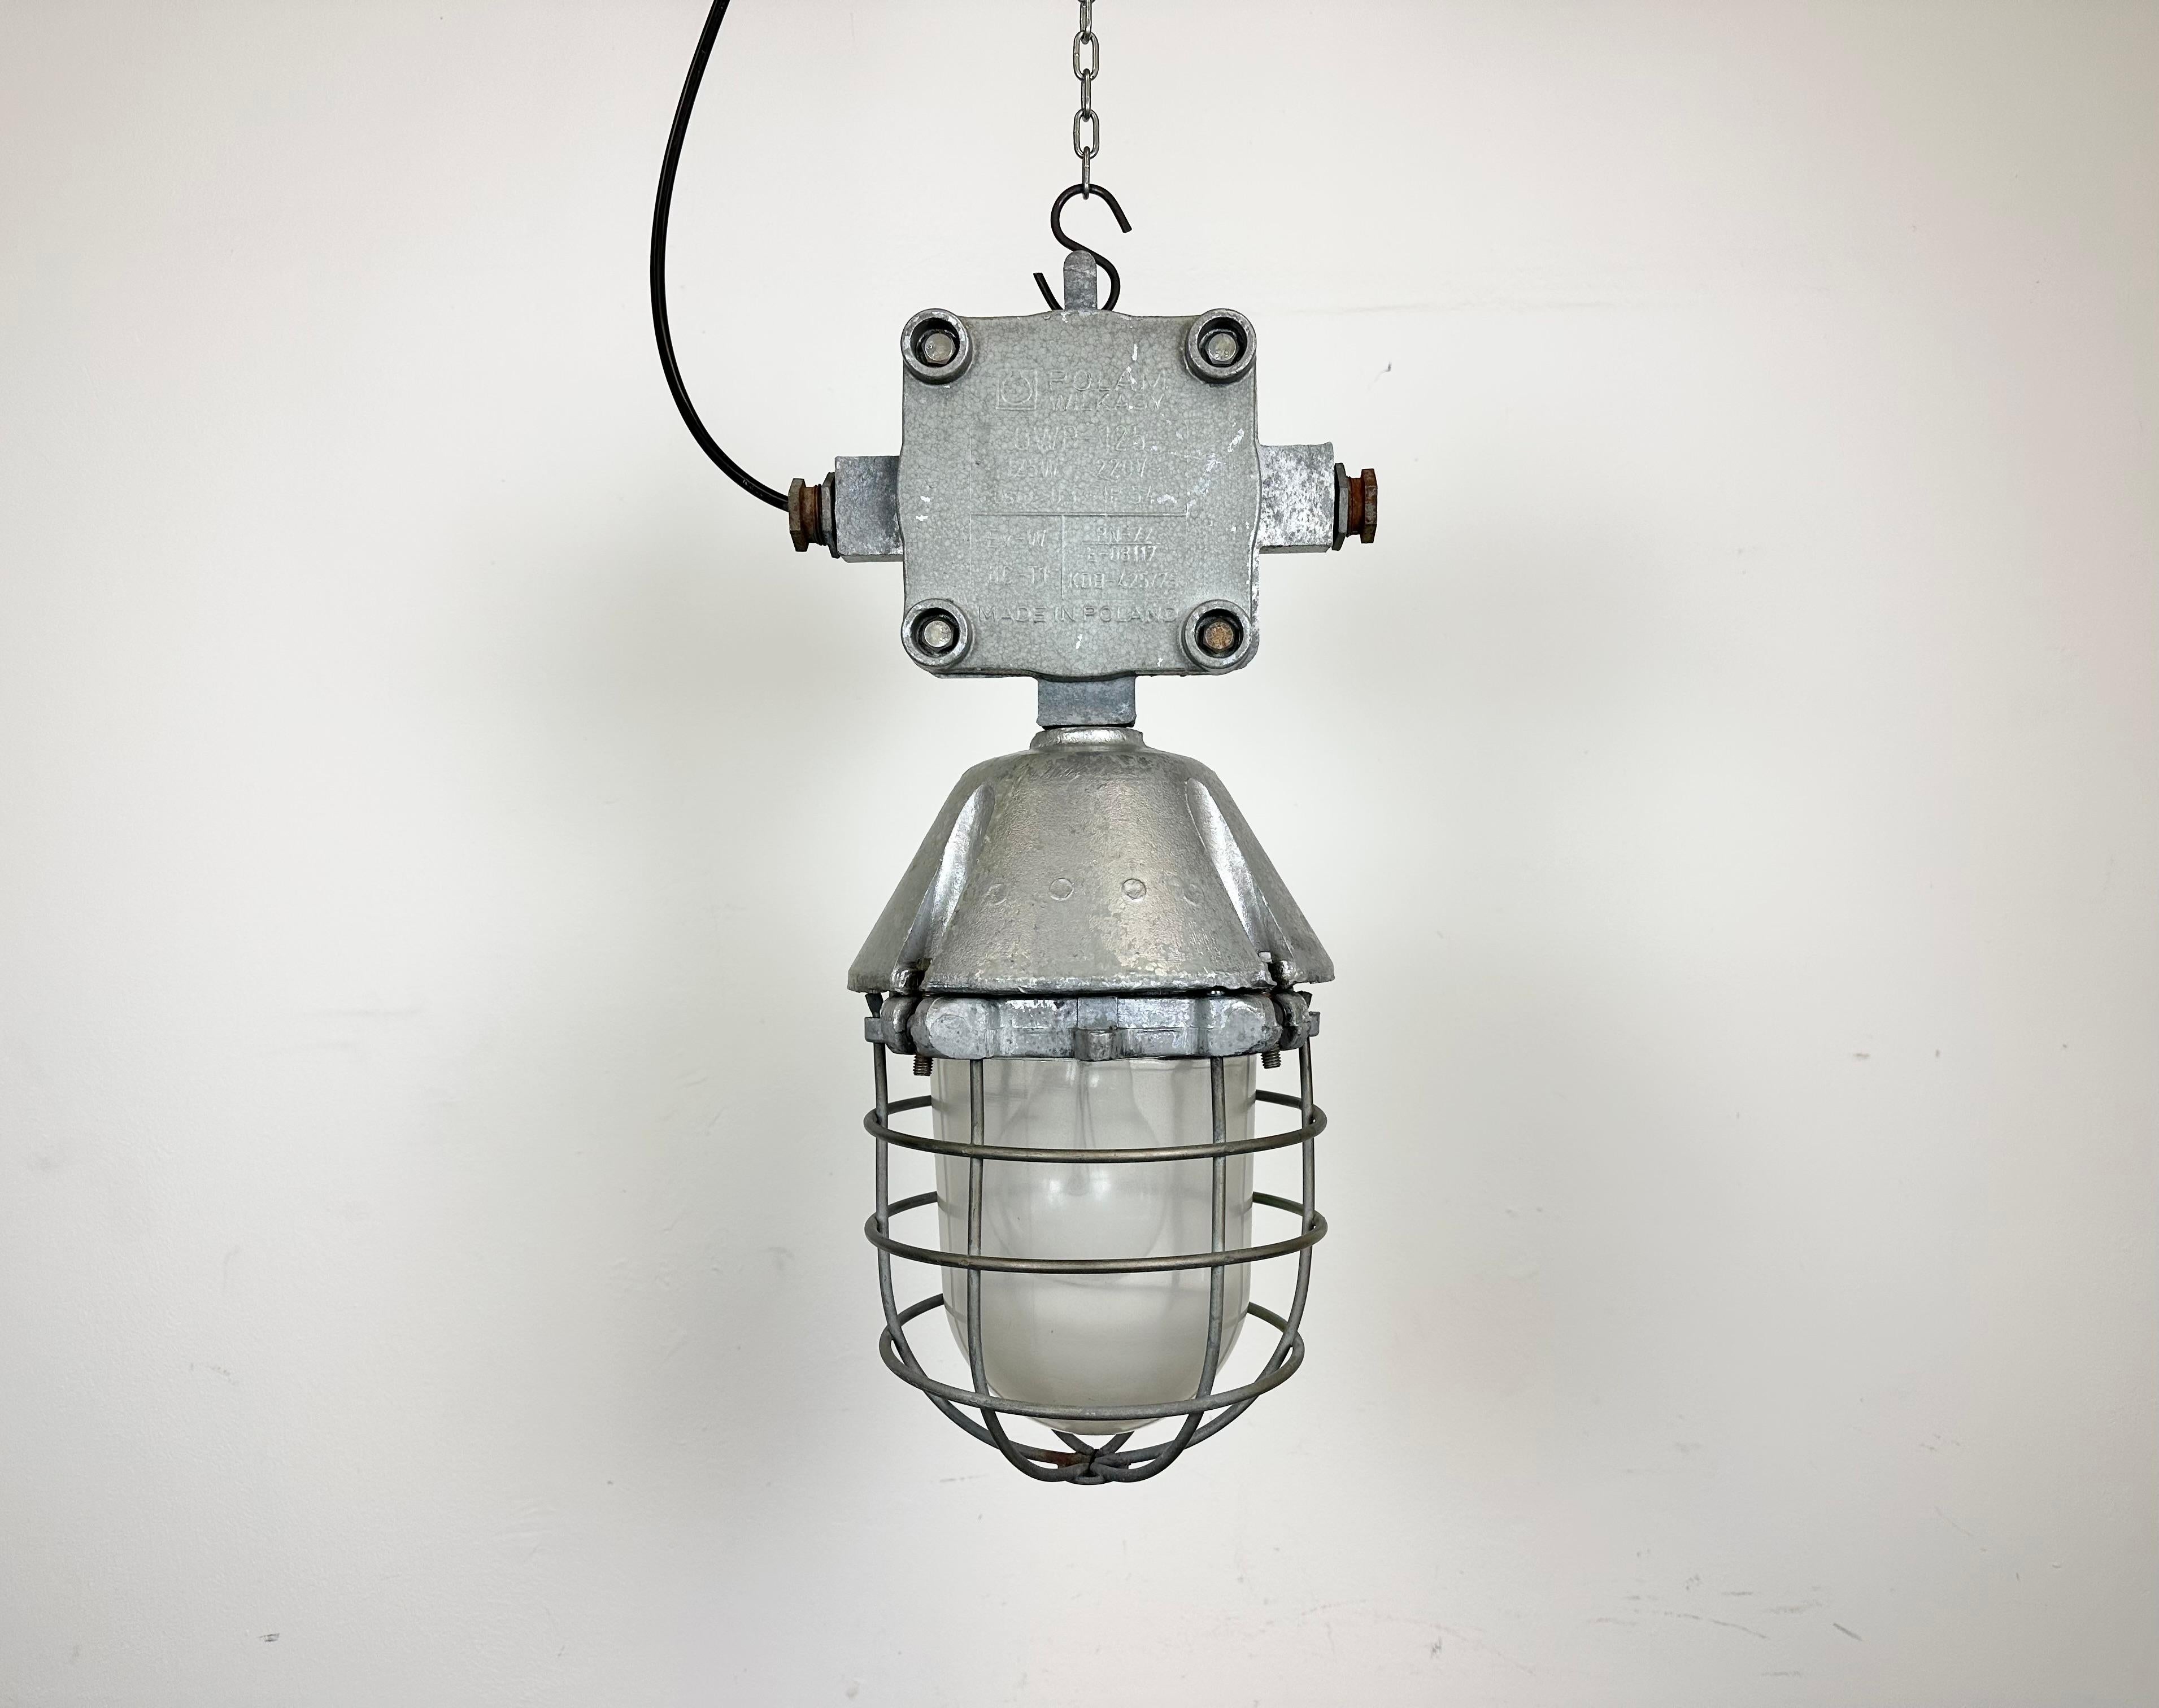 Large industrial factory hanging lamp made by Polam Wilkasy in Poland during the 1960s. It features a cast aluminium body, a clear glass cover and iron grid. The porcelain socket requires standard E 27/ E 26 lightbulbs. New wire. The weight of the